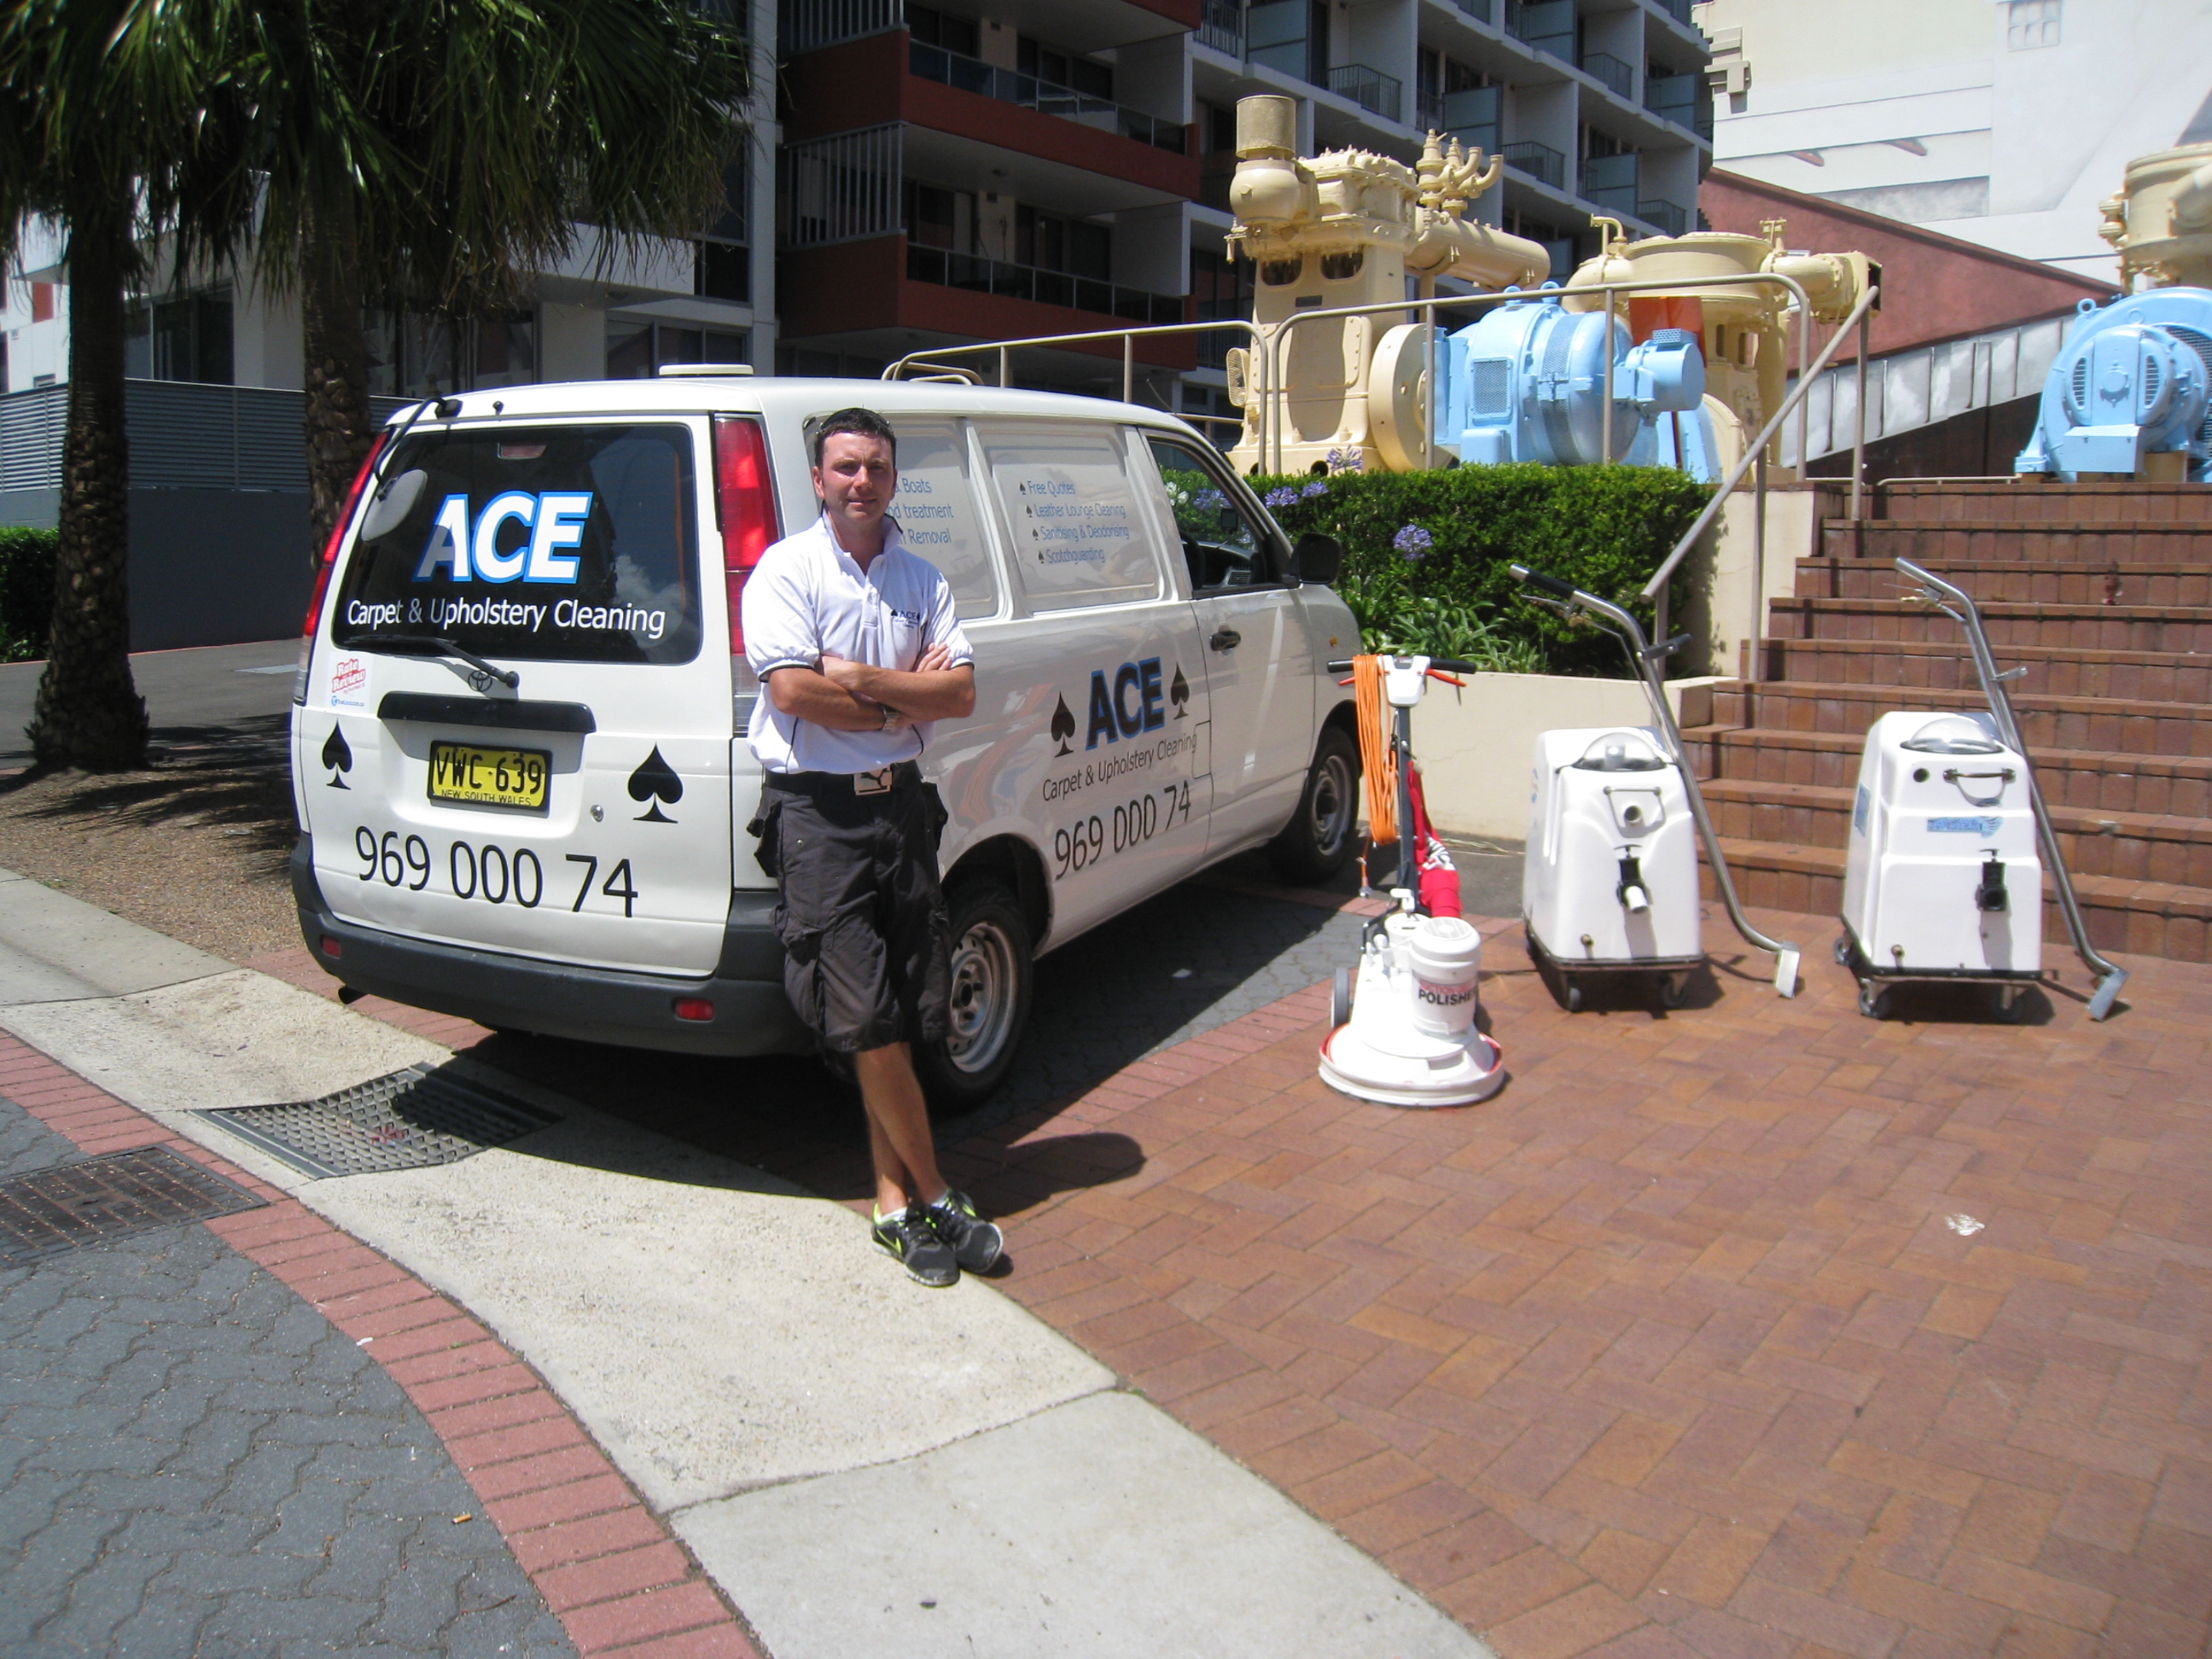 Ace Carpet & Upholstery Cleaning ( pty ltd )